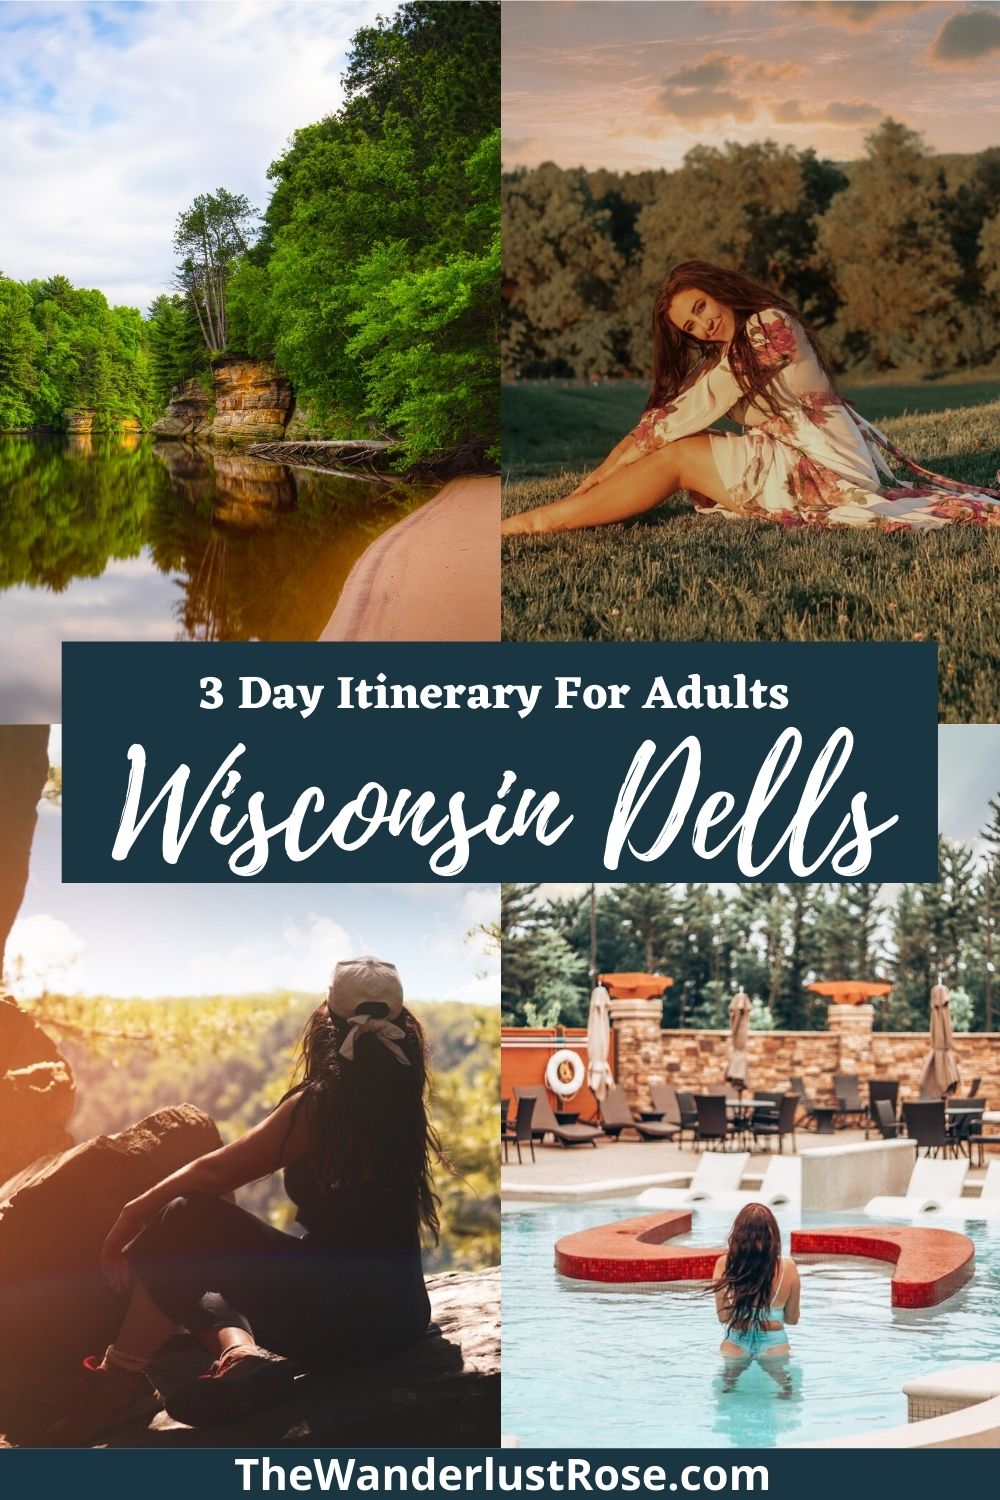 Wisconsin Dells 3 Day Itinerary For Adults - The Wanderlust Rose